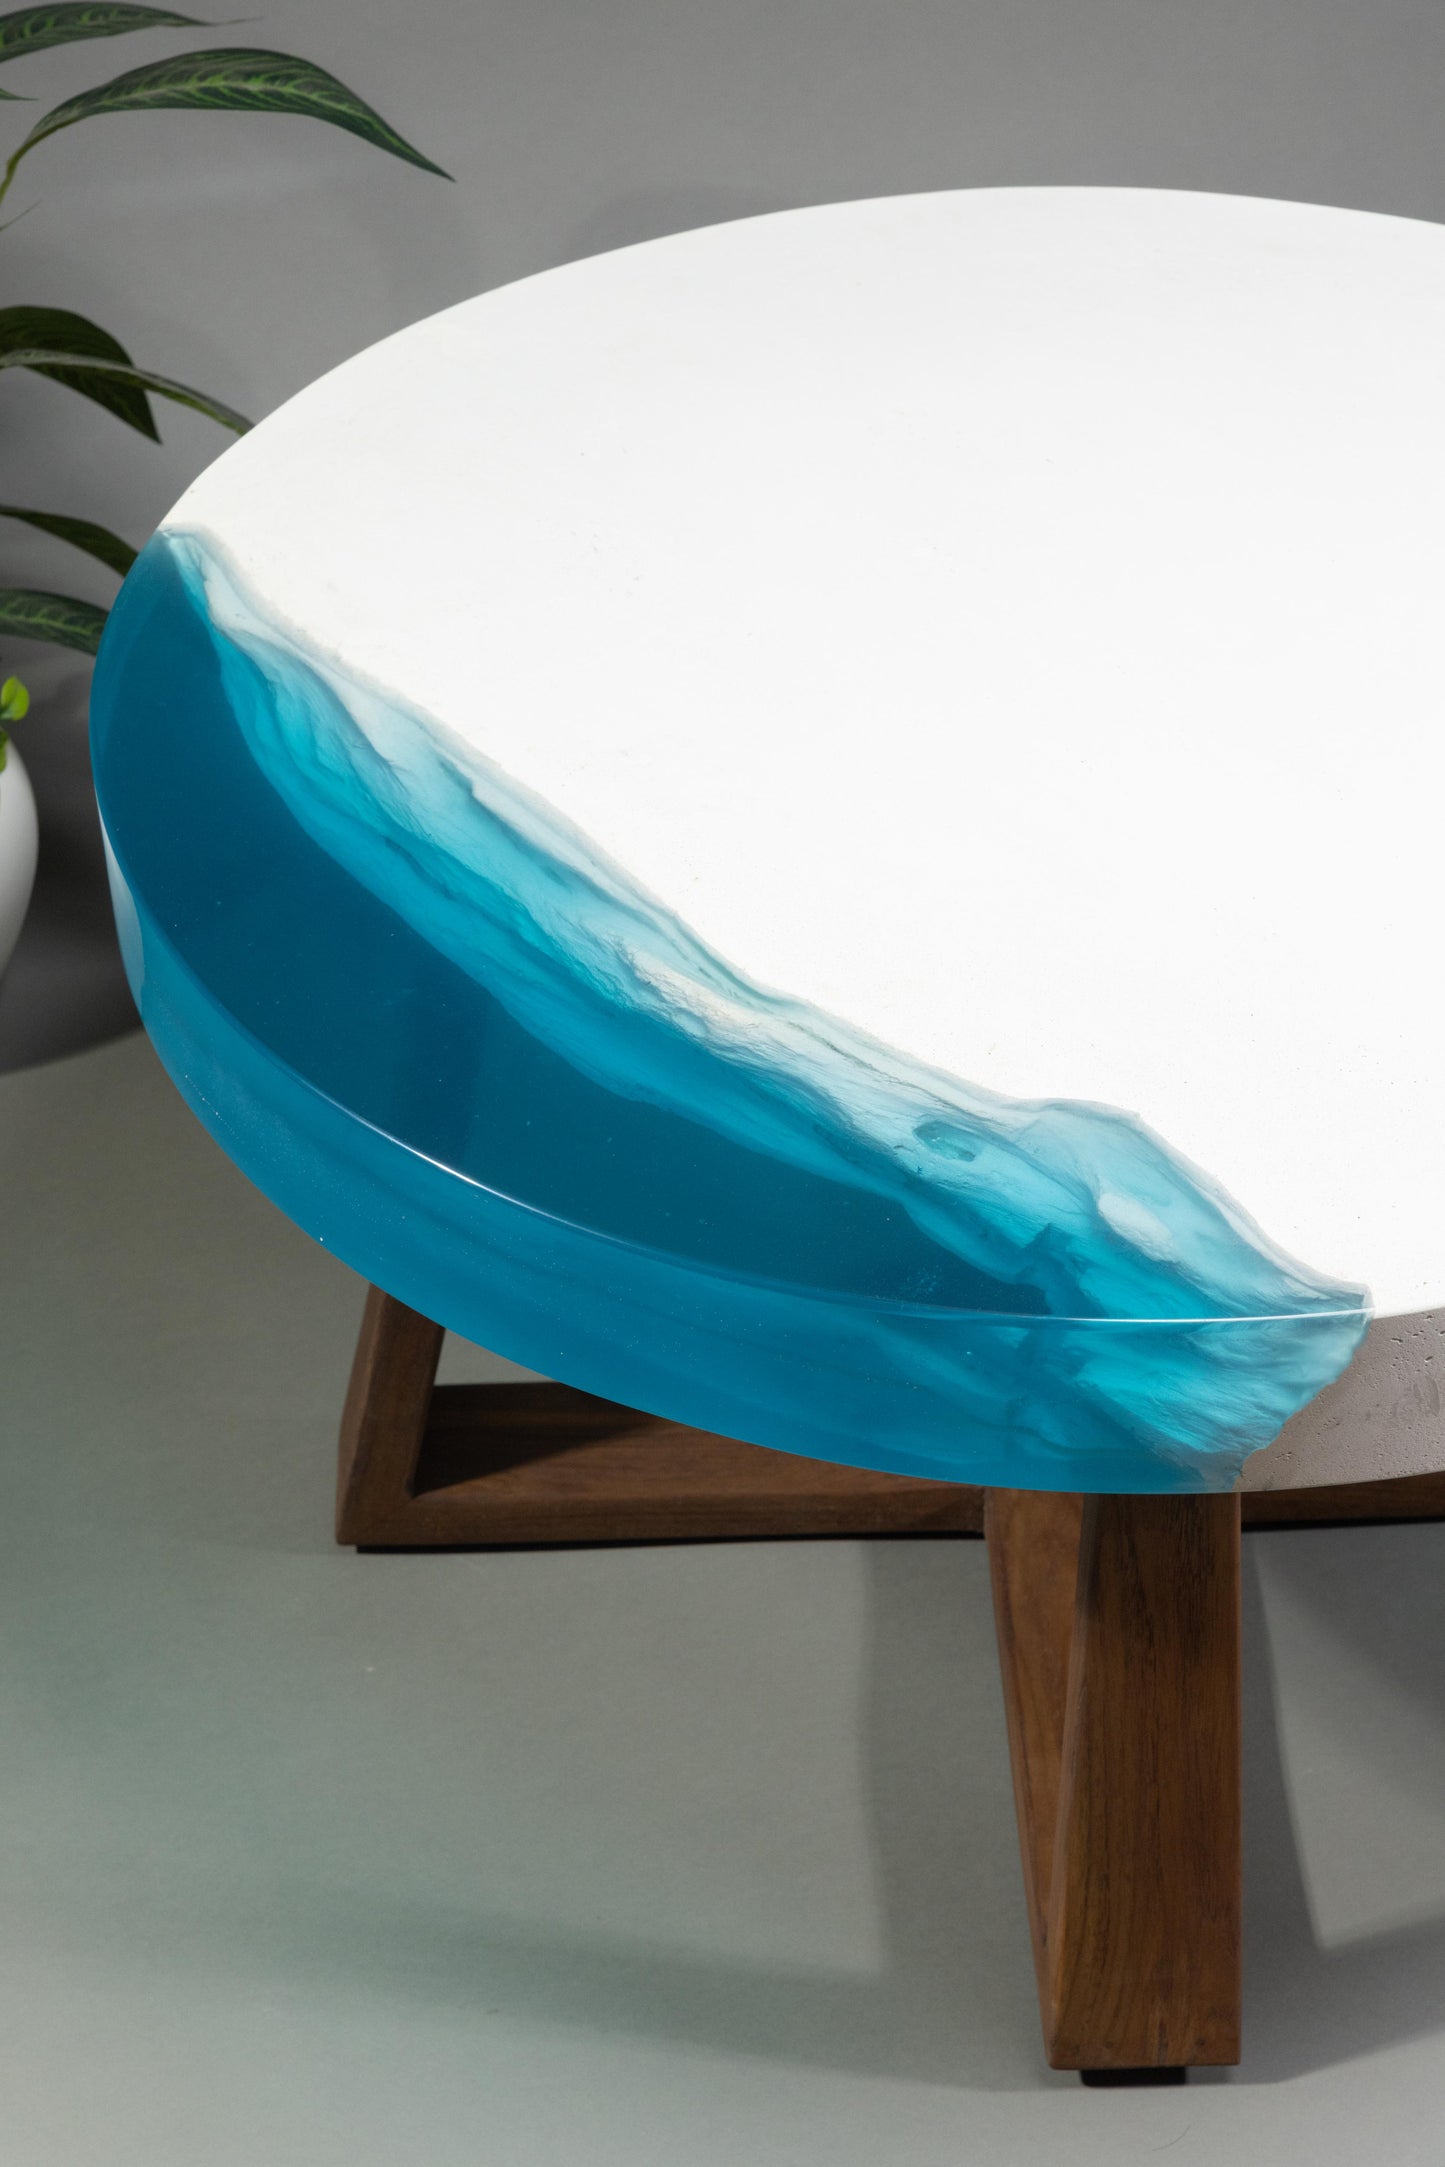 The Oceanic Fusion Table